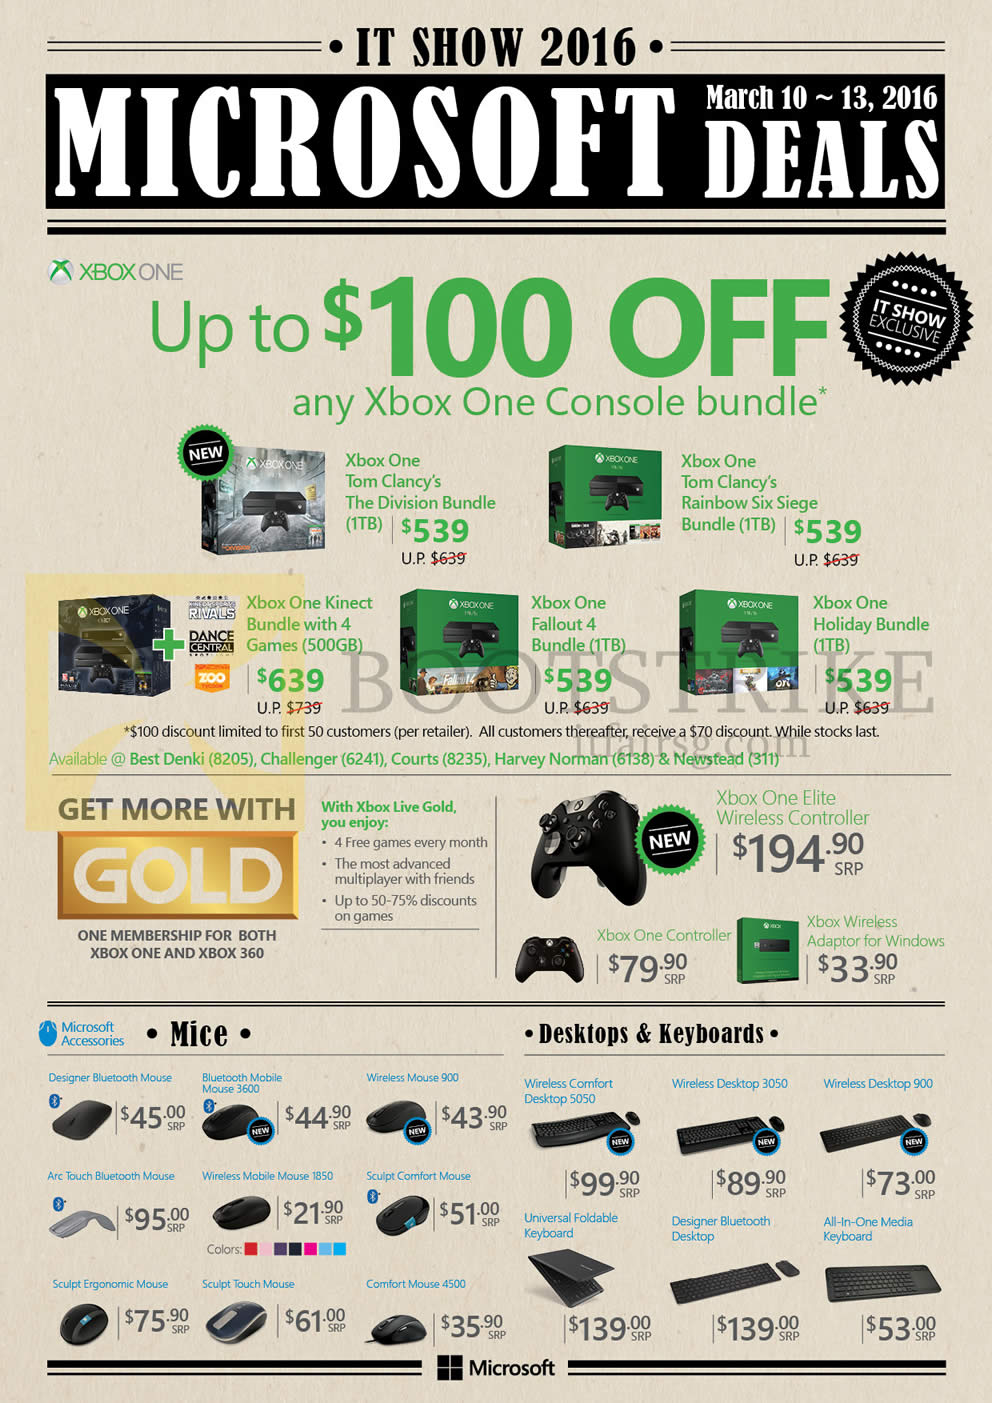 IT SHOW 2016 price list image brochure of Microsoft Xbox One, Mouse, Desktops, Keyboards, Kinect, Fallout 4, Holiday Bundle, Arc Touch, Sculpt Ergonomic, Wireless Comfort Desktop 5050, AIO Media Keyboard